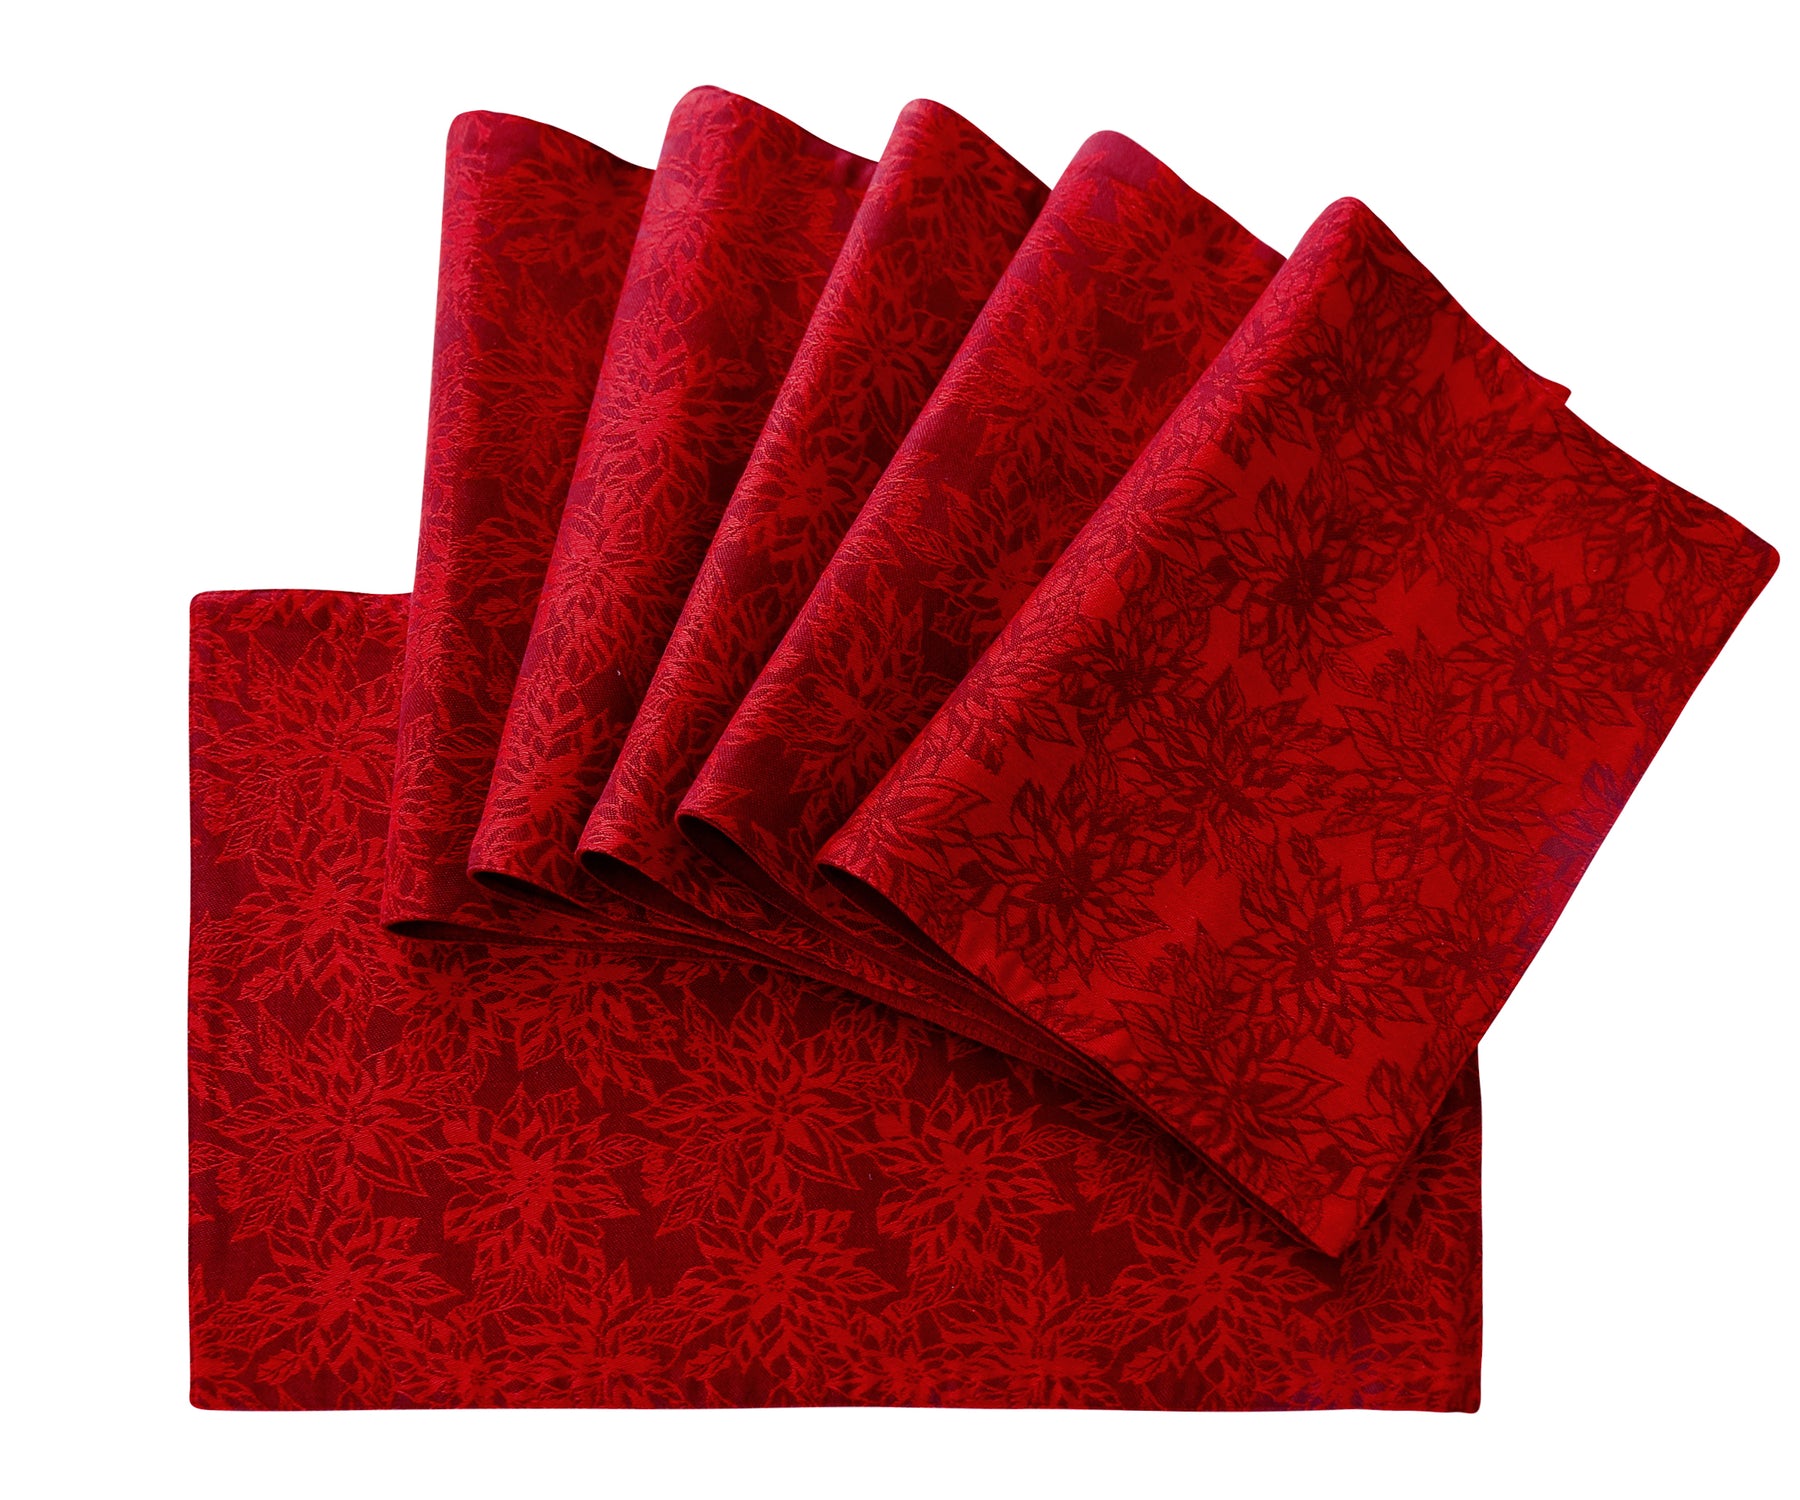 Cloth placemats- Add a touch of elegance to your table with these striking red placemats.